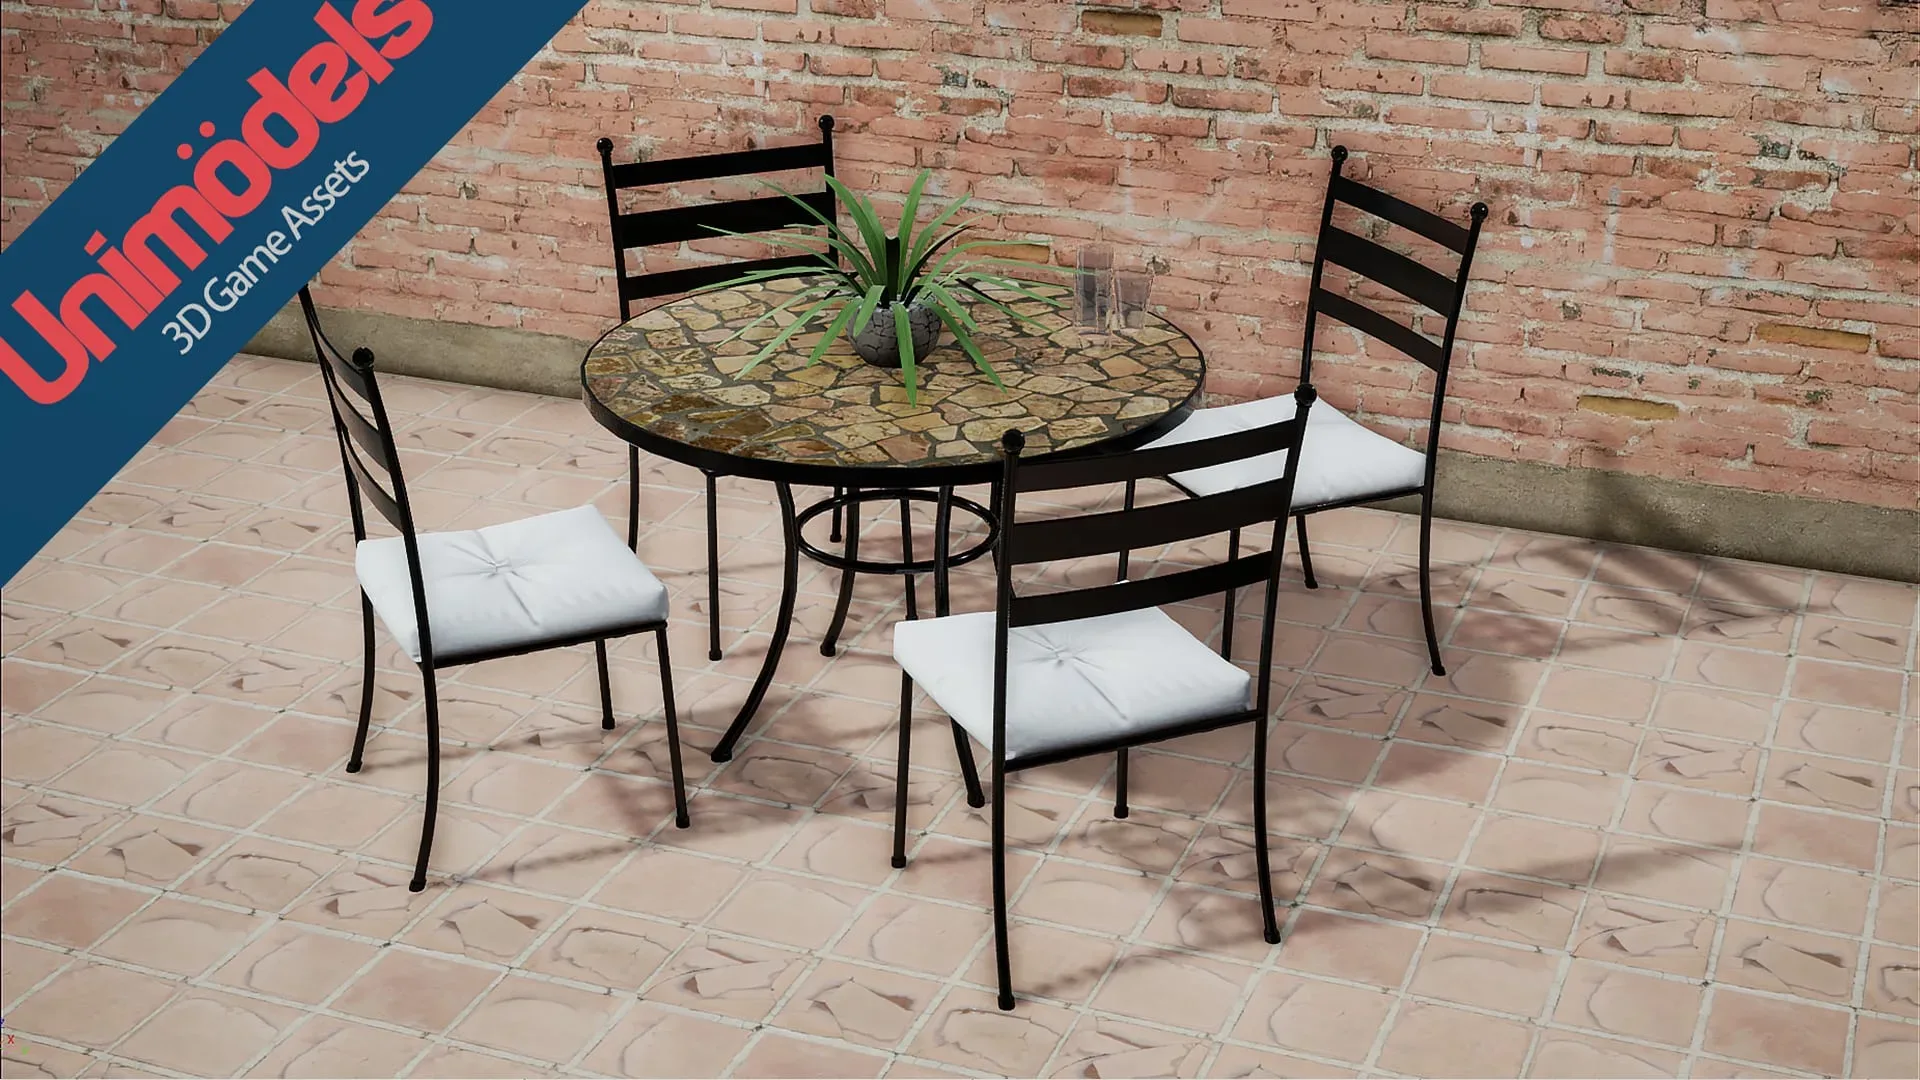 Unimodels Exterior Chairs & Tables for Unity